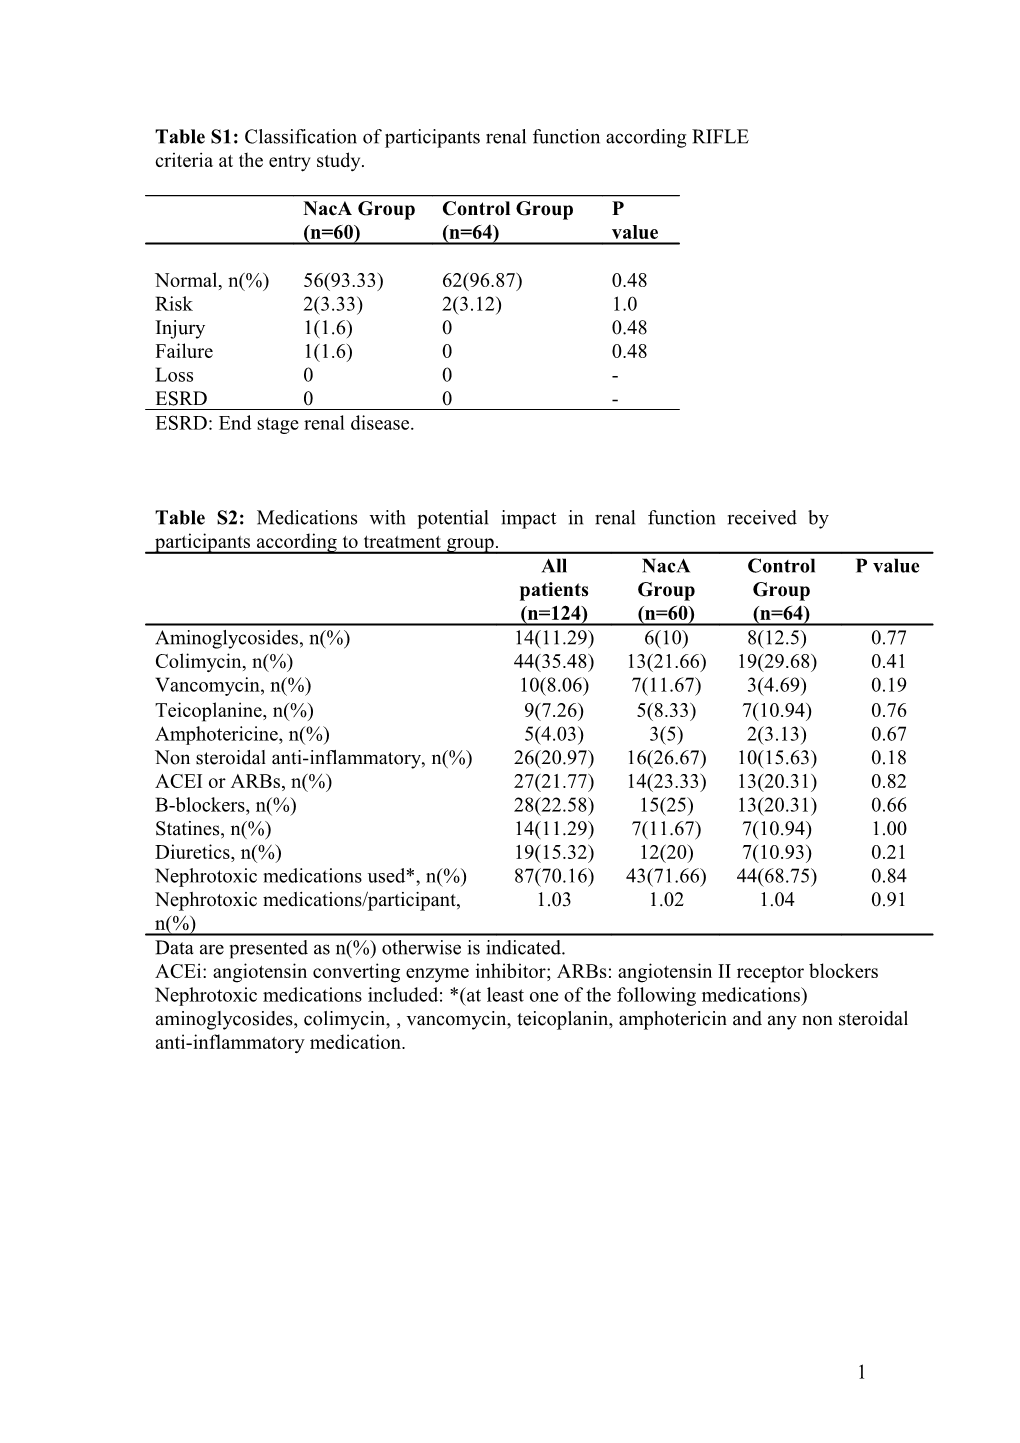 Table S1: Classification of Participants Renal Function According RIFLE Criteria at The